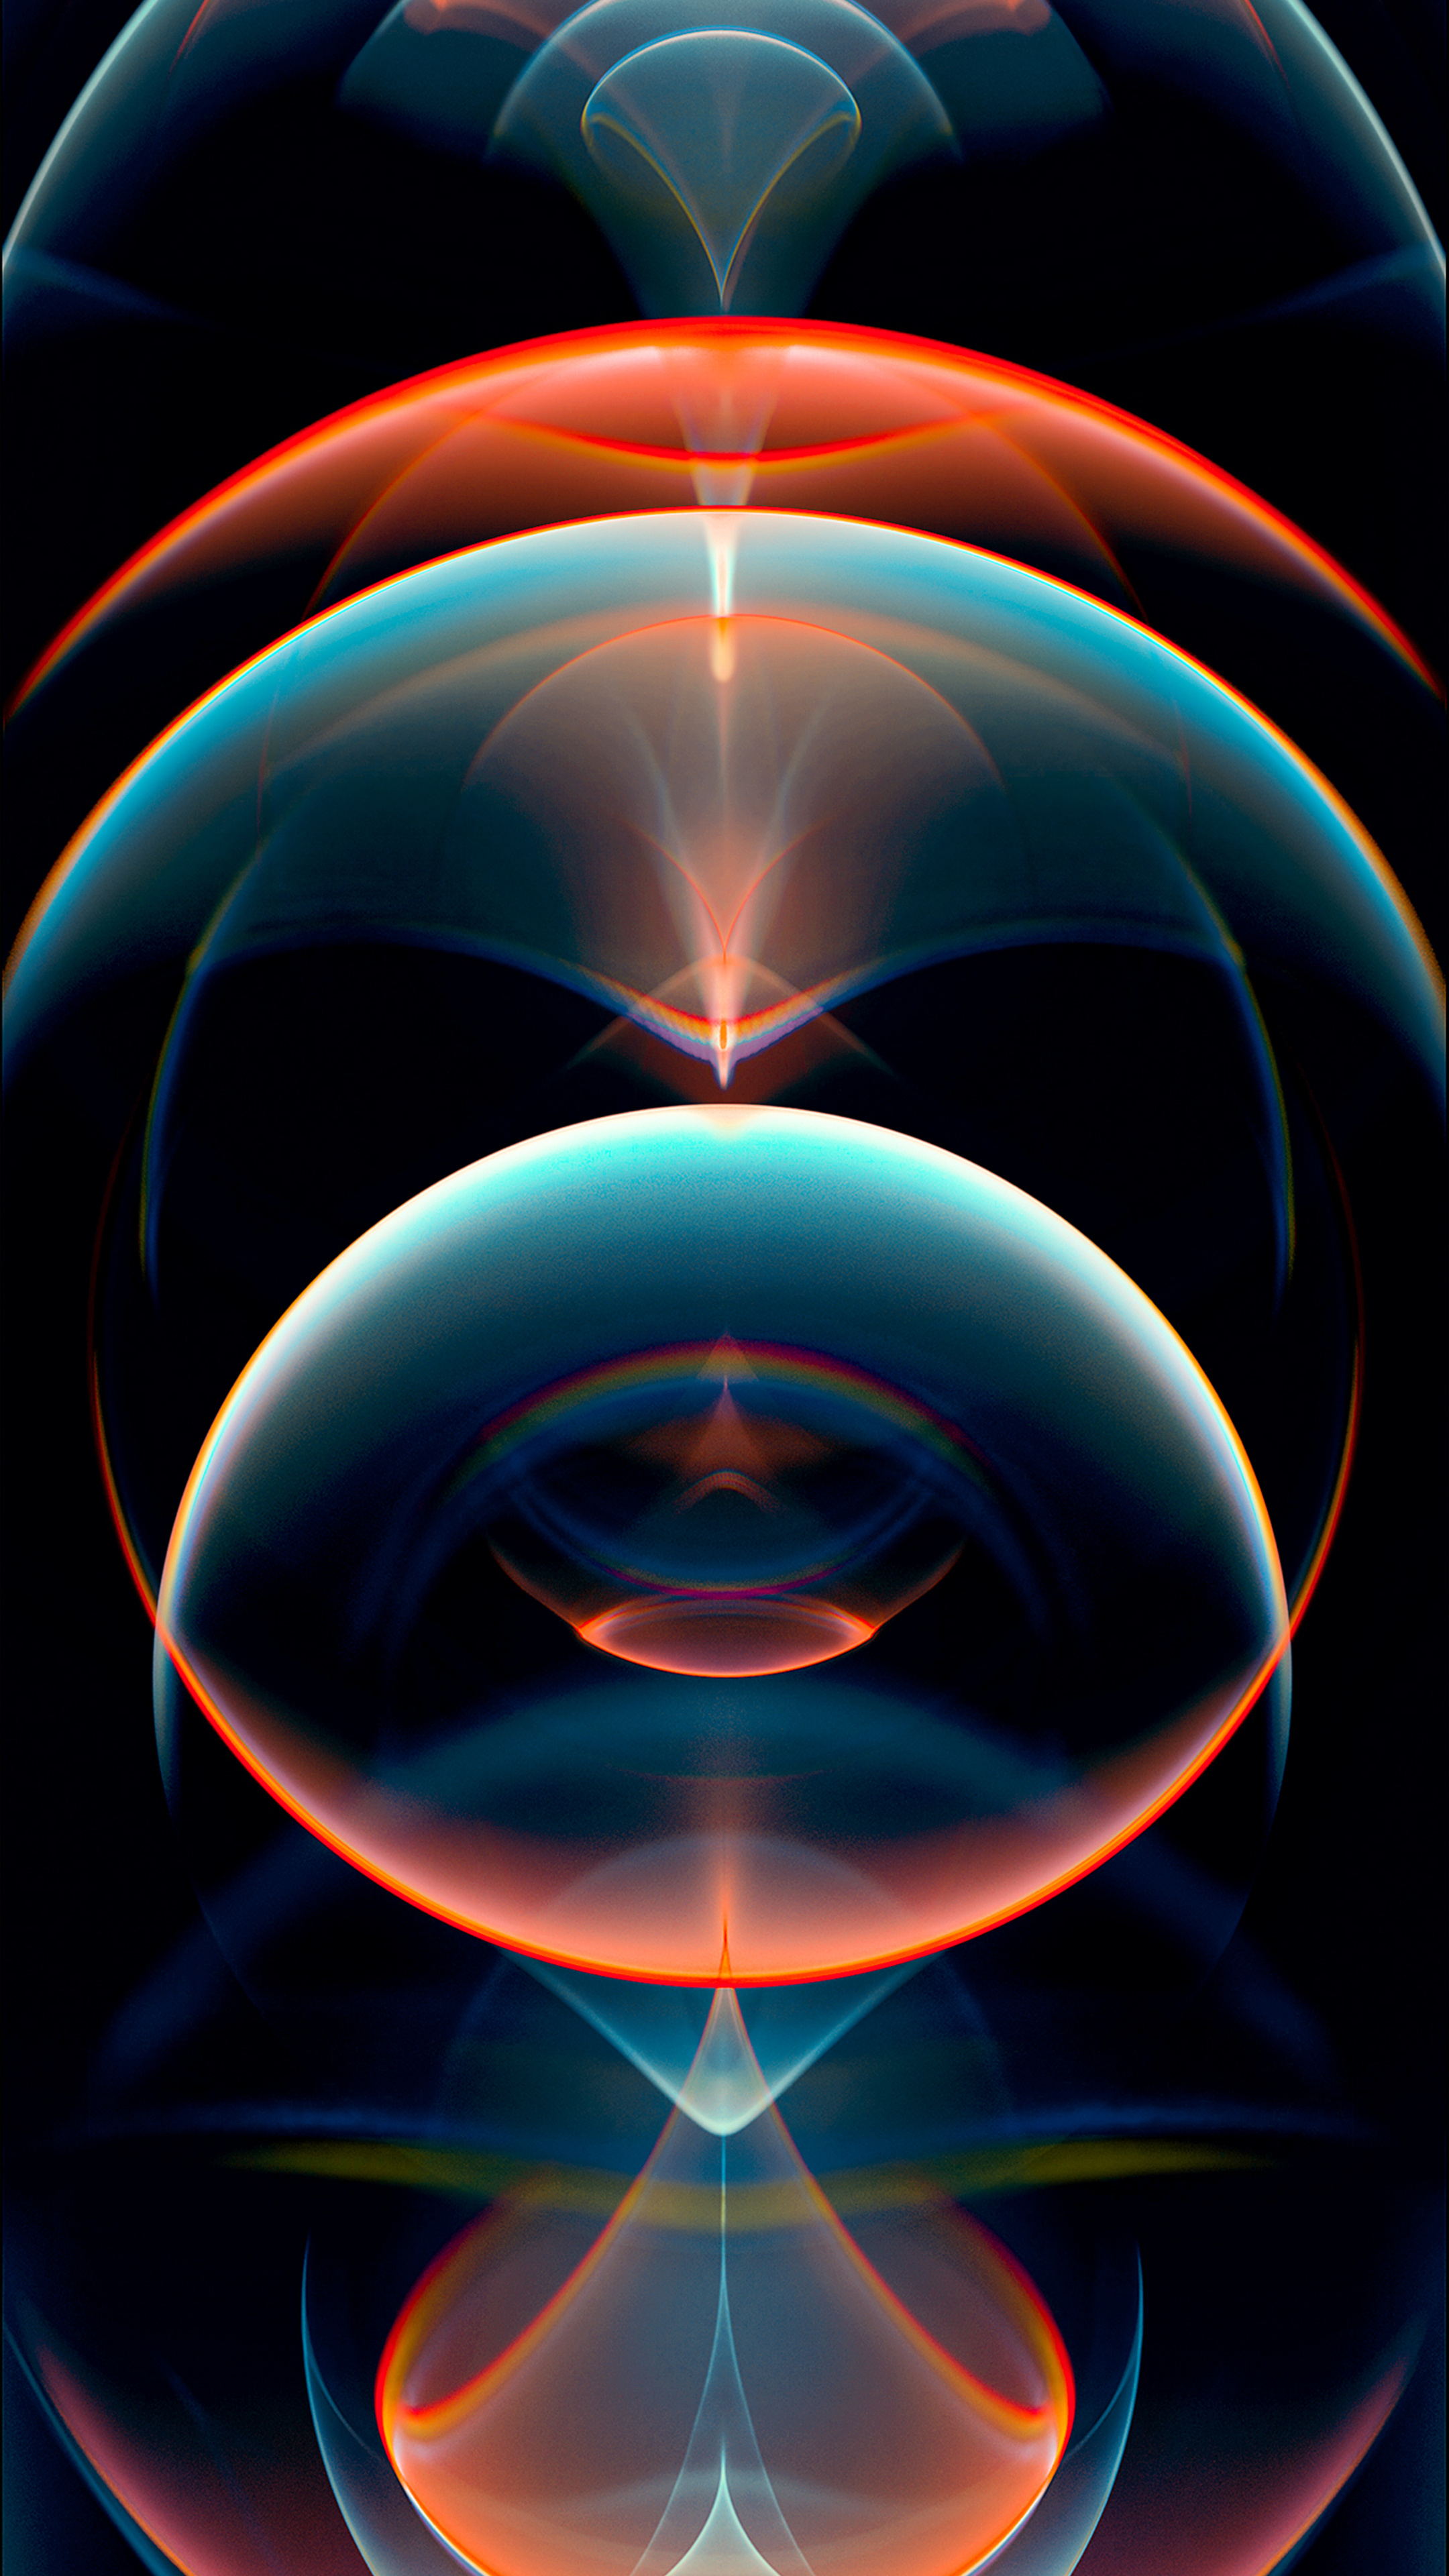 Graphic: Abstract digital pattern, Cyberspace design visualization, Bubbles of light. 2160x3840 4K Background.